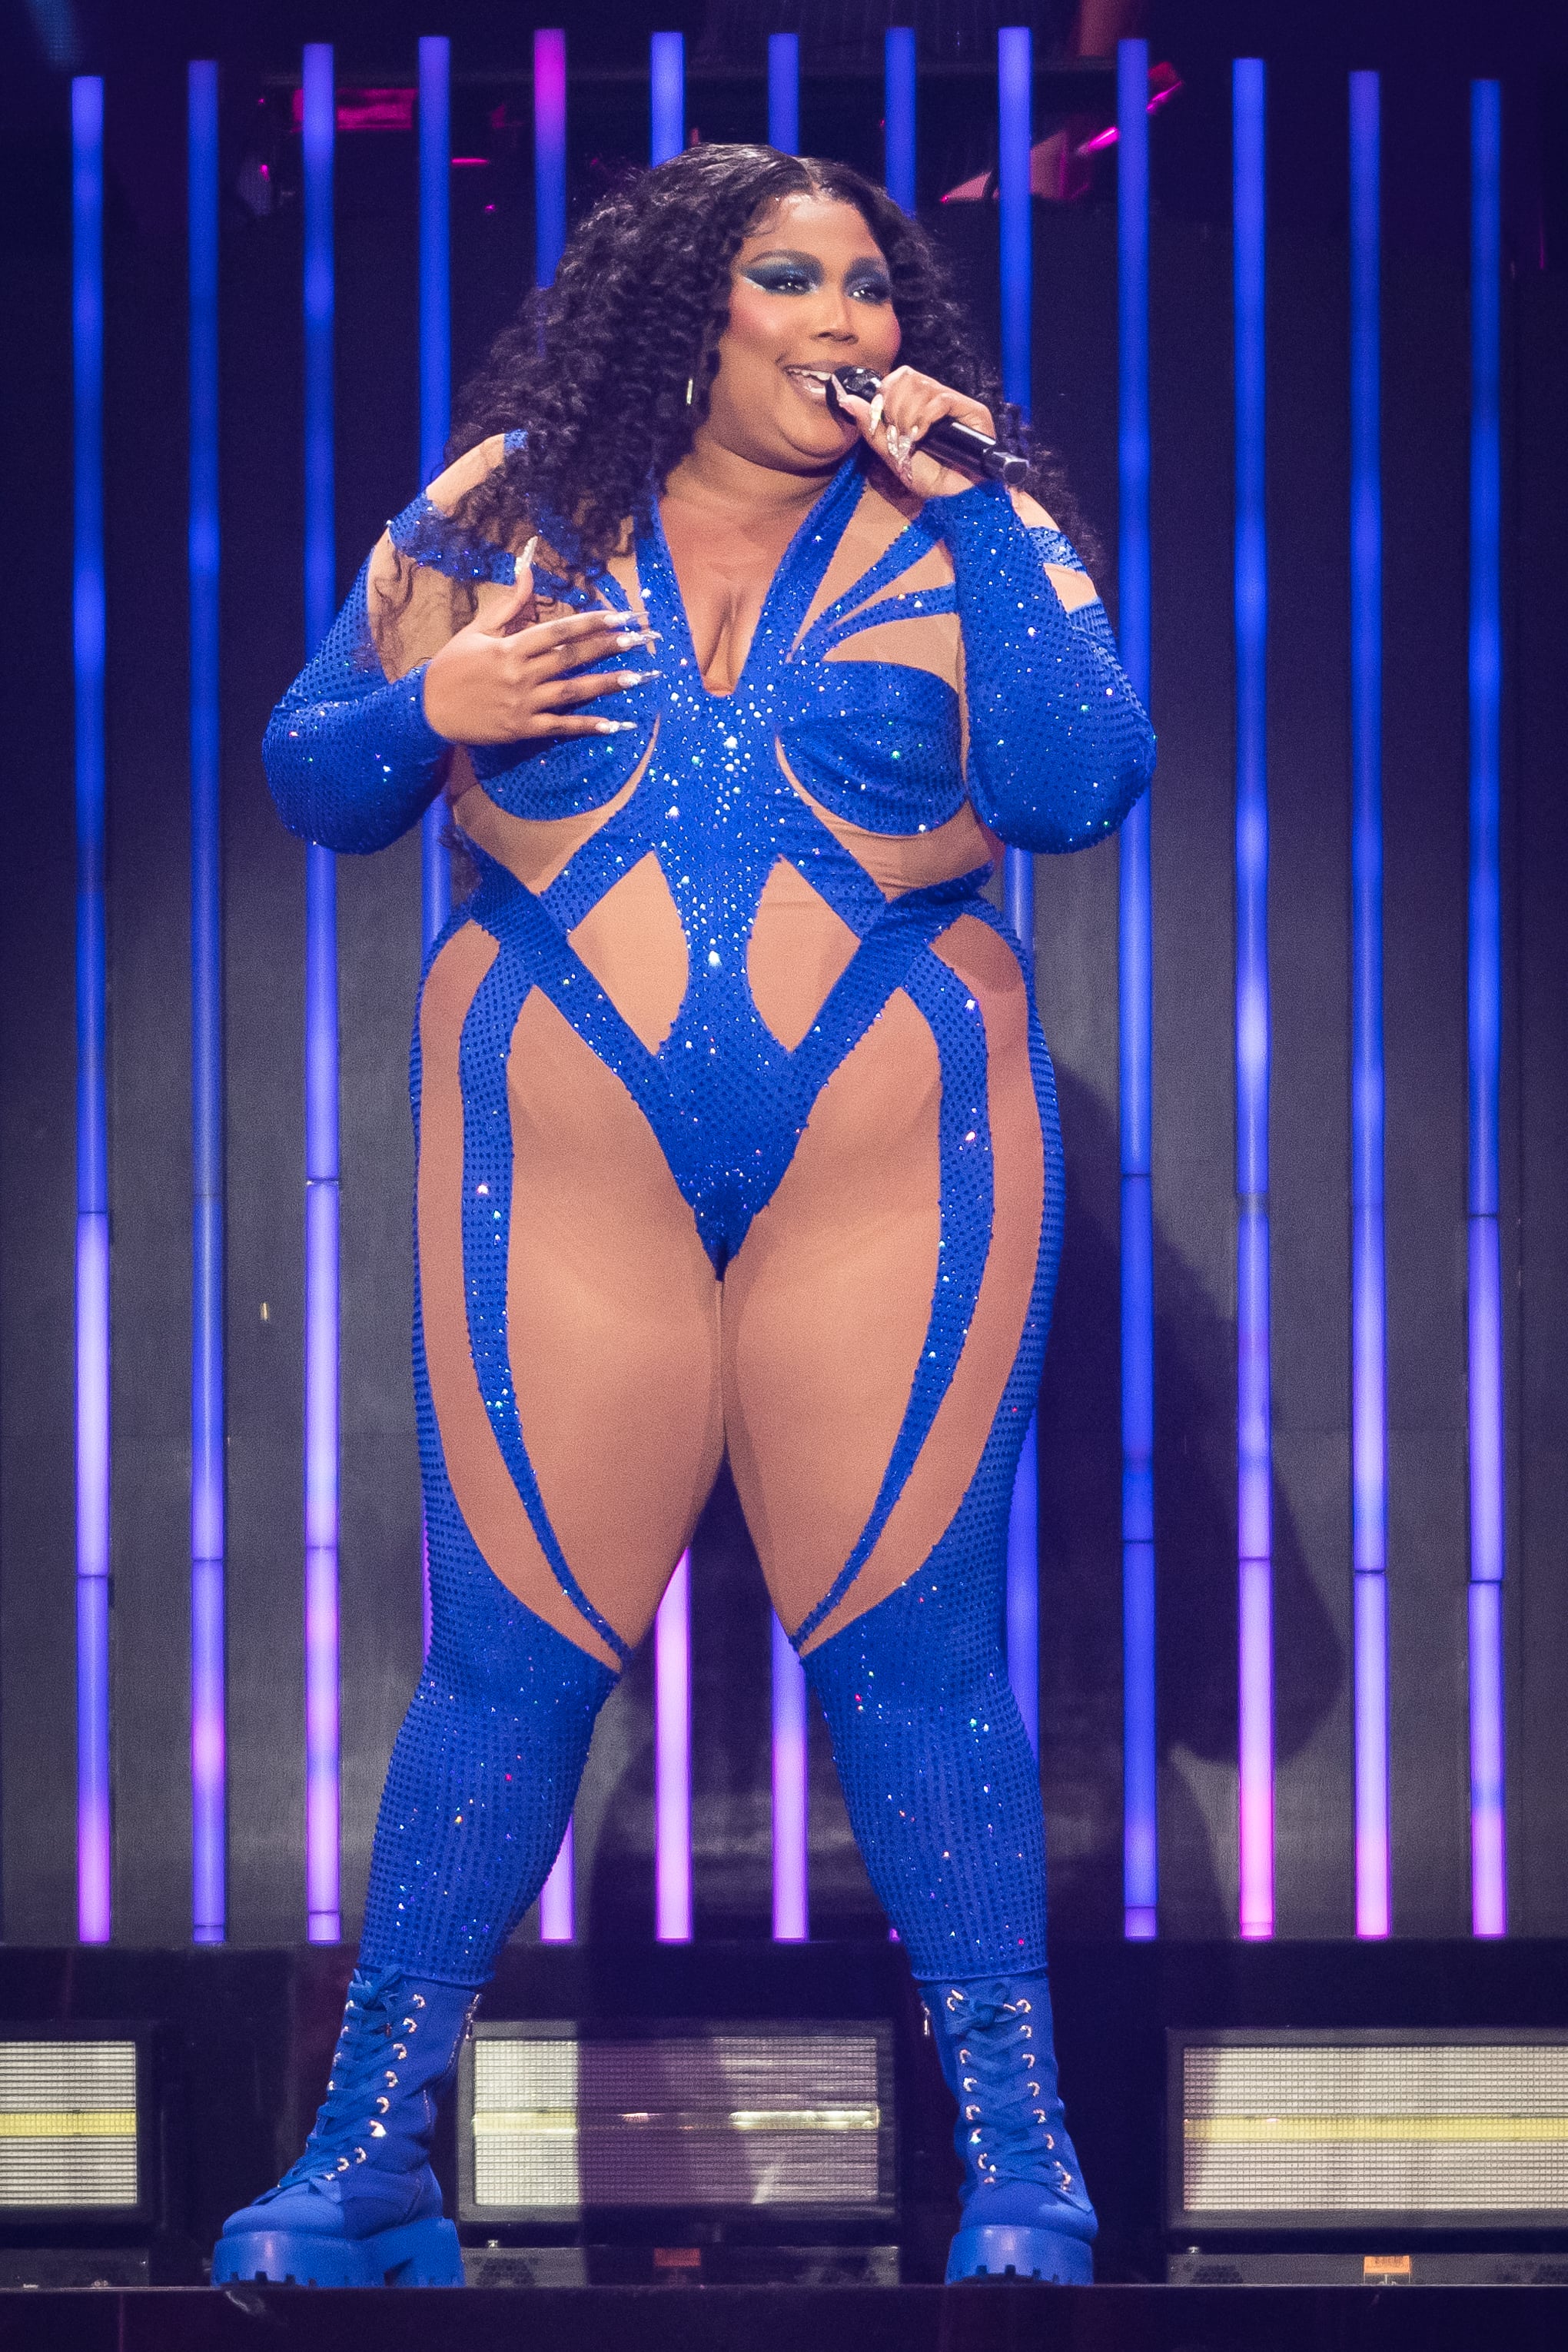 Lizzo Shines in Gold Bodysuit on Stage at NYC Concert!: Photo 4359720, Lizzo Photos